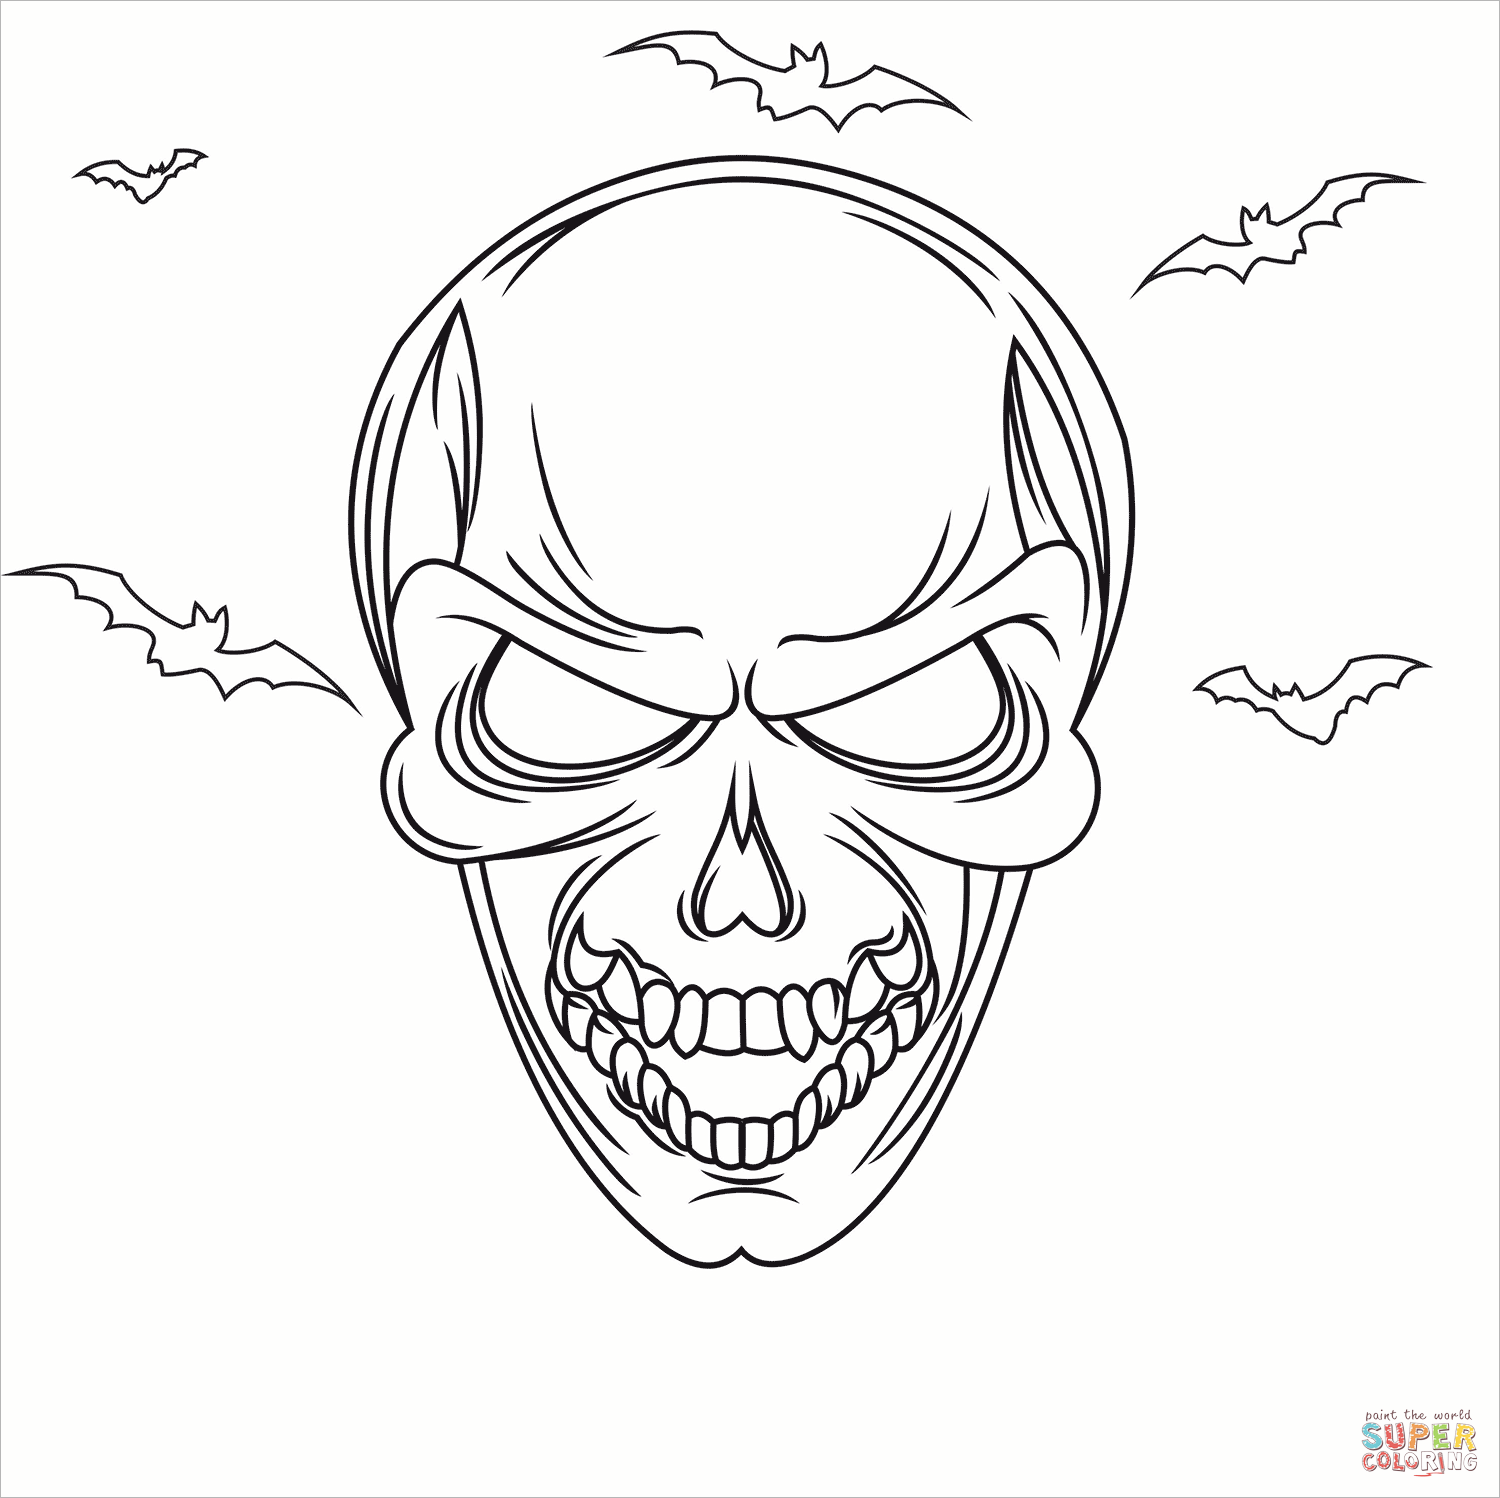 Evil skull coloring page free printable coloring pages